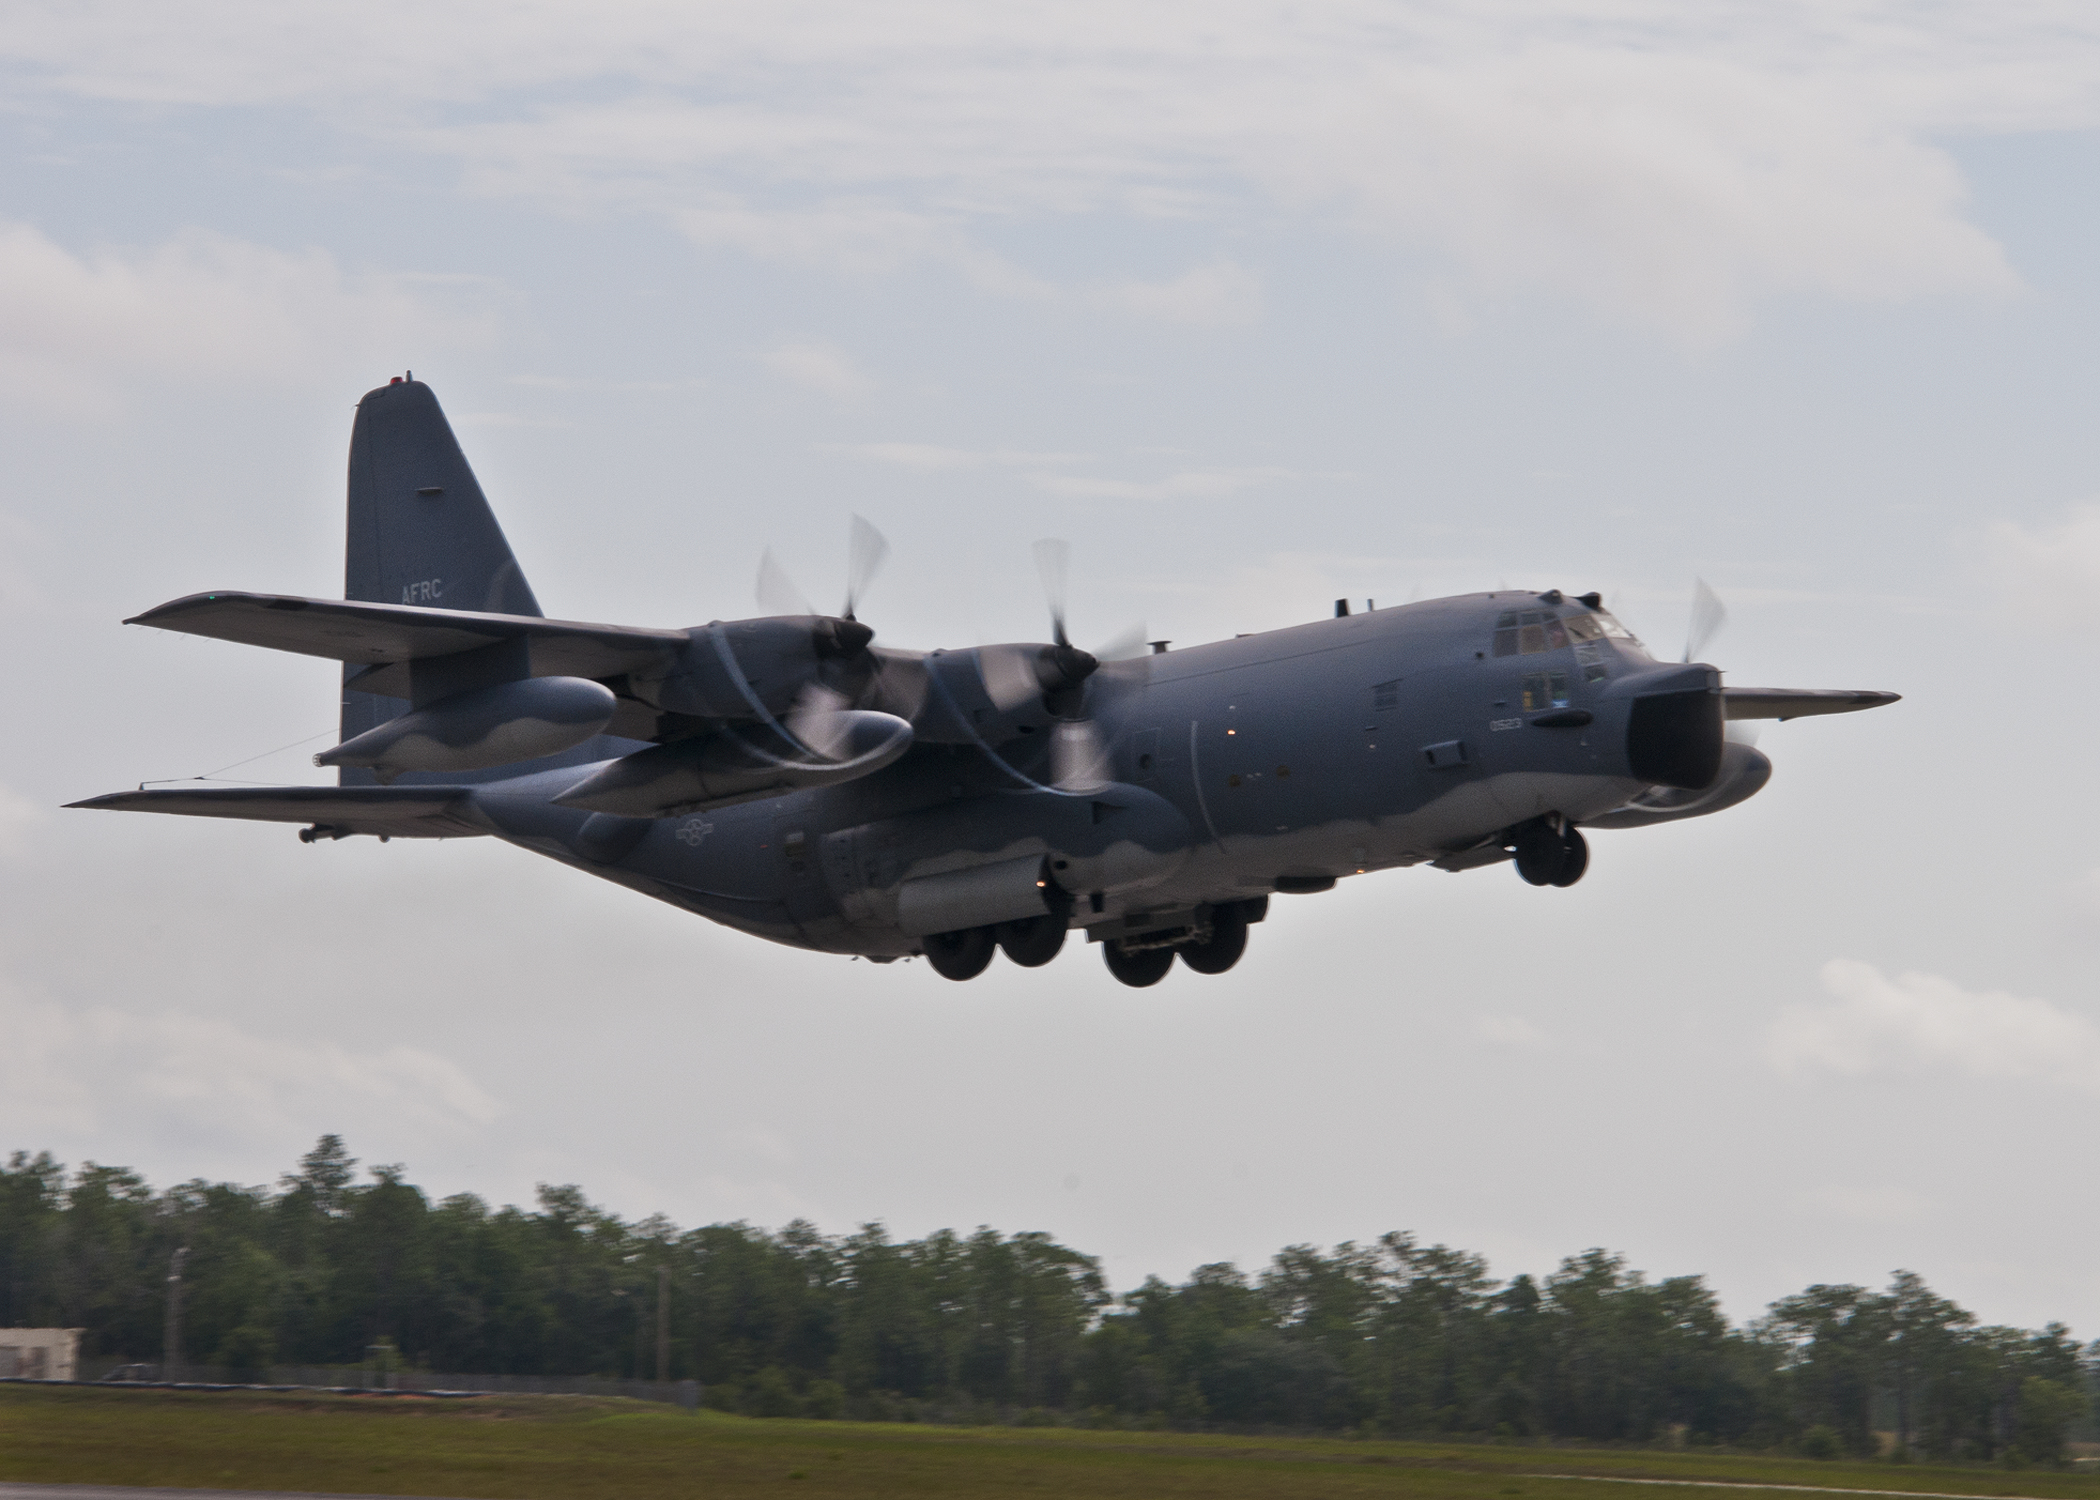 This Lockheed MC-130E-LM Combat Talon I, serial number 64-0523, was CHERRY 01, leading the assault helicopters during the raid on the Sơn Tây prison. After 47 years of service and more than 23,500 flight hours, Five-Two-Three made its last flight, 22 June 2012. It is shown in this photograph taking off from its special operations base at Duke Field, near Eglin AFB, Florida, flying to Cannon AFB, New Mexico, where it will be placed on display. (U.S. Air Force)